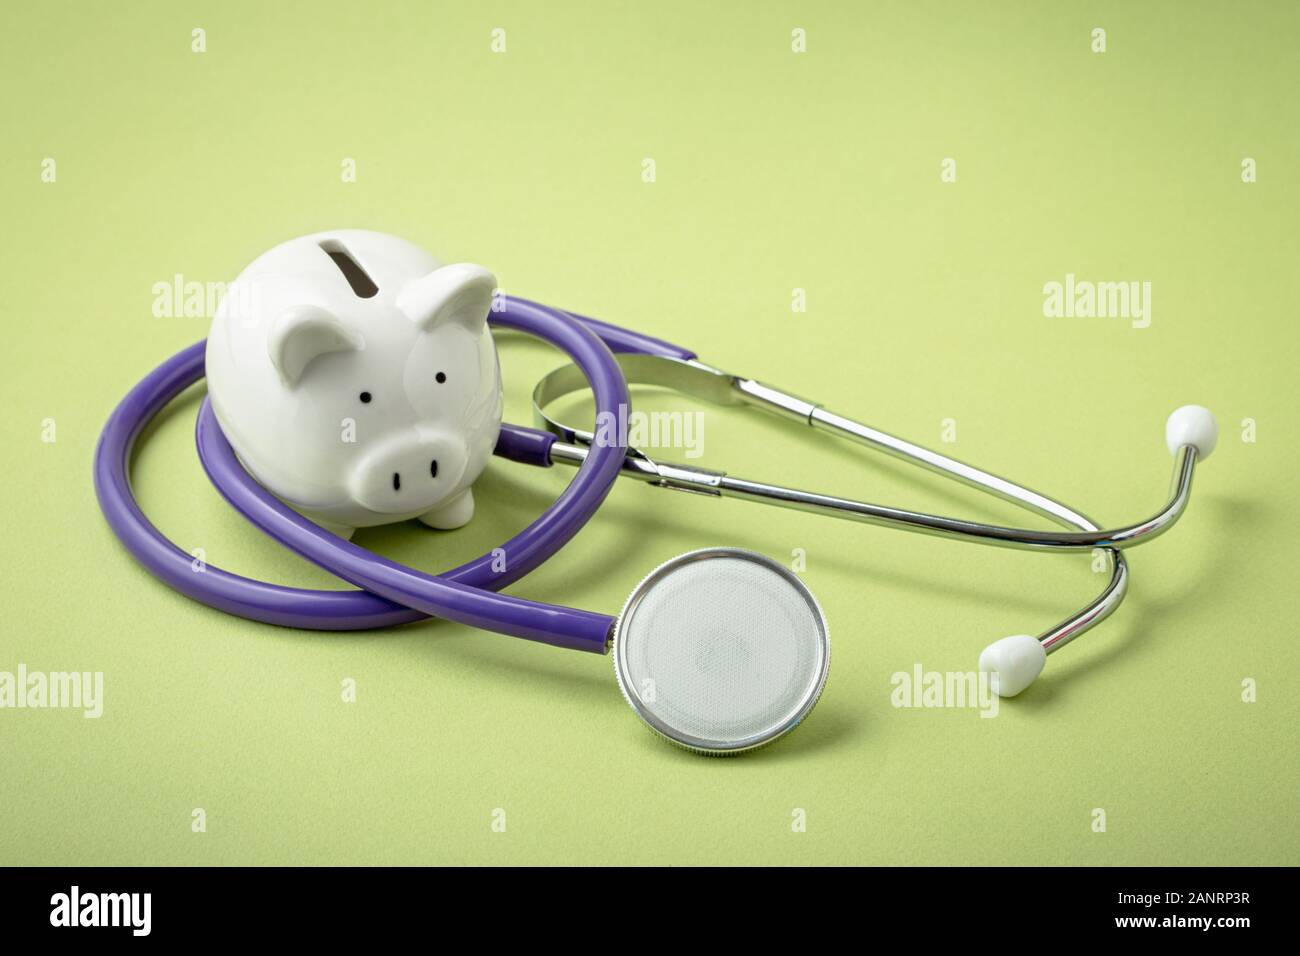 Piggy bank with stethoscope Stock Photo